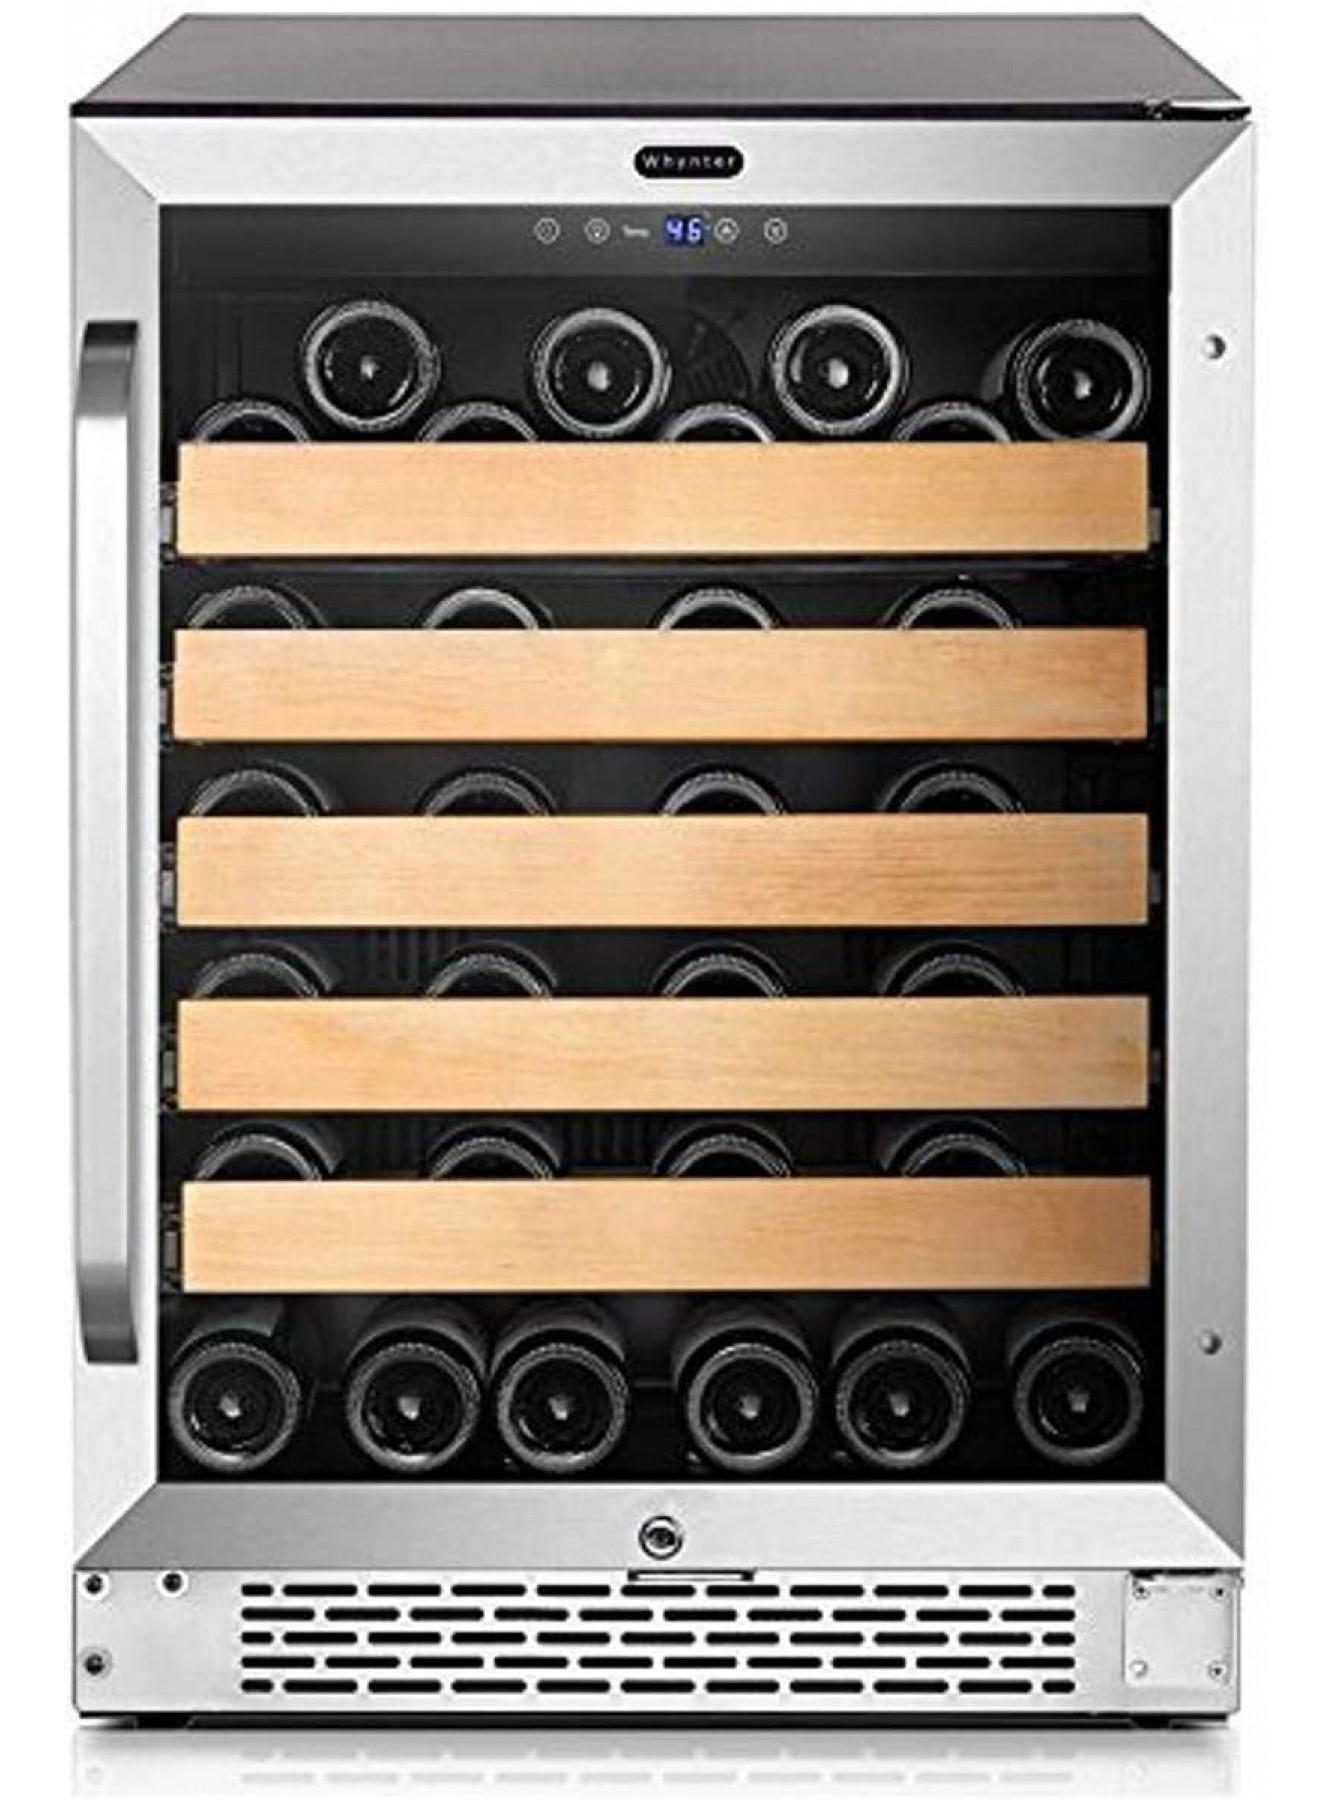 Whynter Coole BWR-541STS 24 Built-in 54 Bottle Wine Refrigerator Cooler Stainless Steel One Size Silver B076SKFV2B